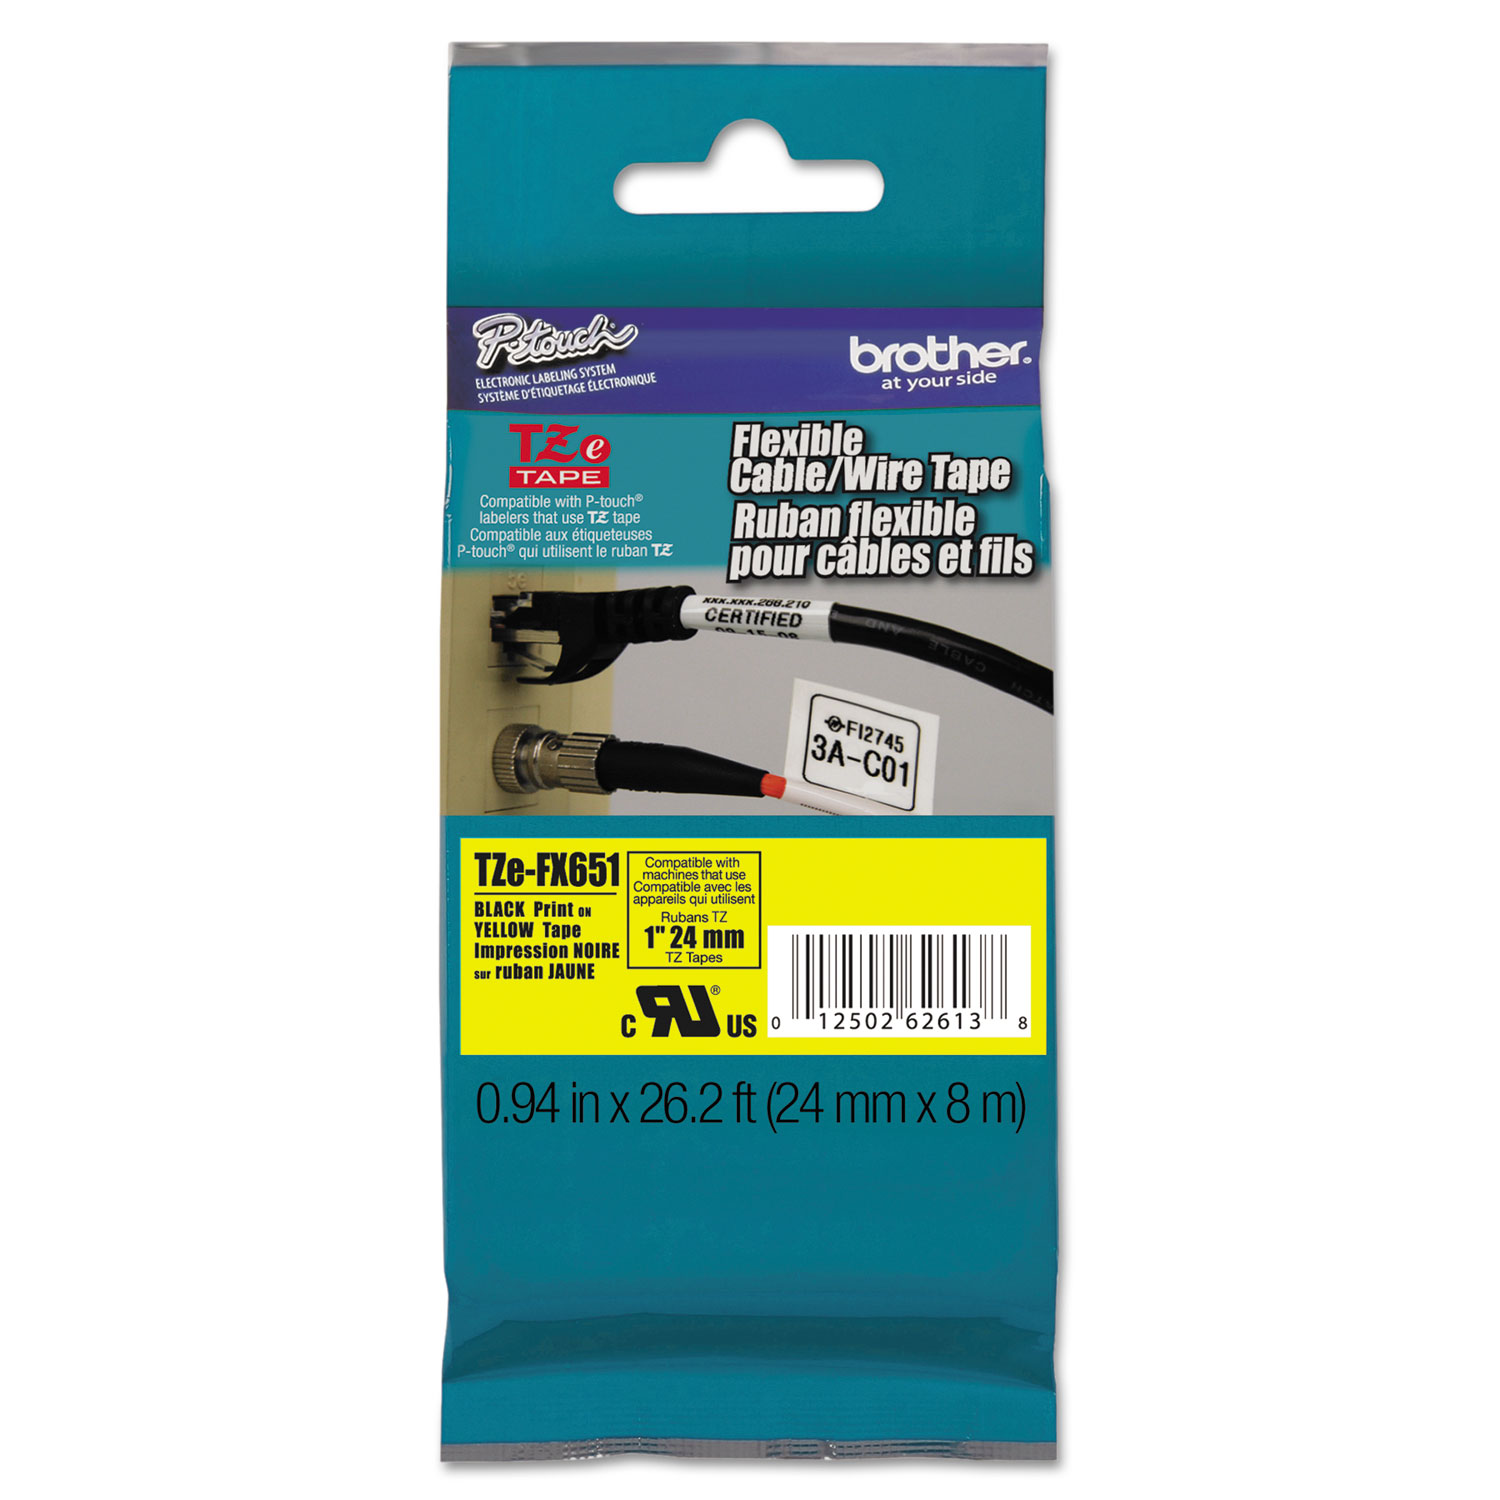  Brother P-Touch TZEFX651 TZe Flexible Tape Cartridge for P-Touch Labelers, 0.94 x 26.2 ft, Black on Yellow (BRTTZEFX651) 